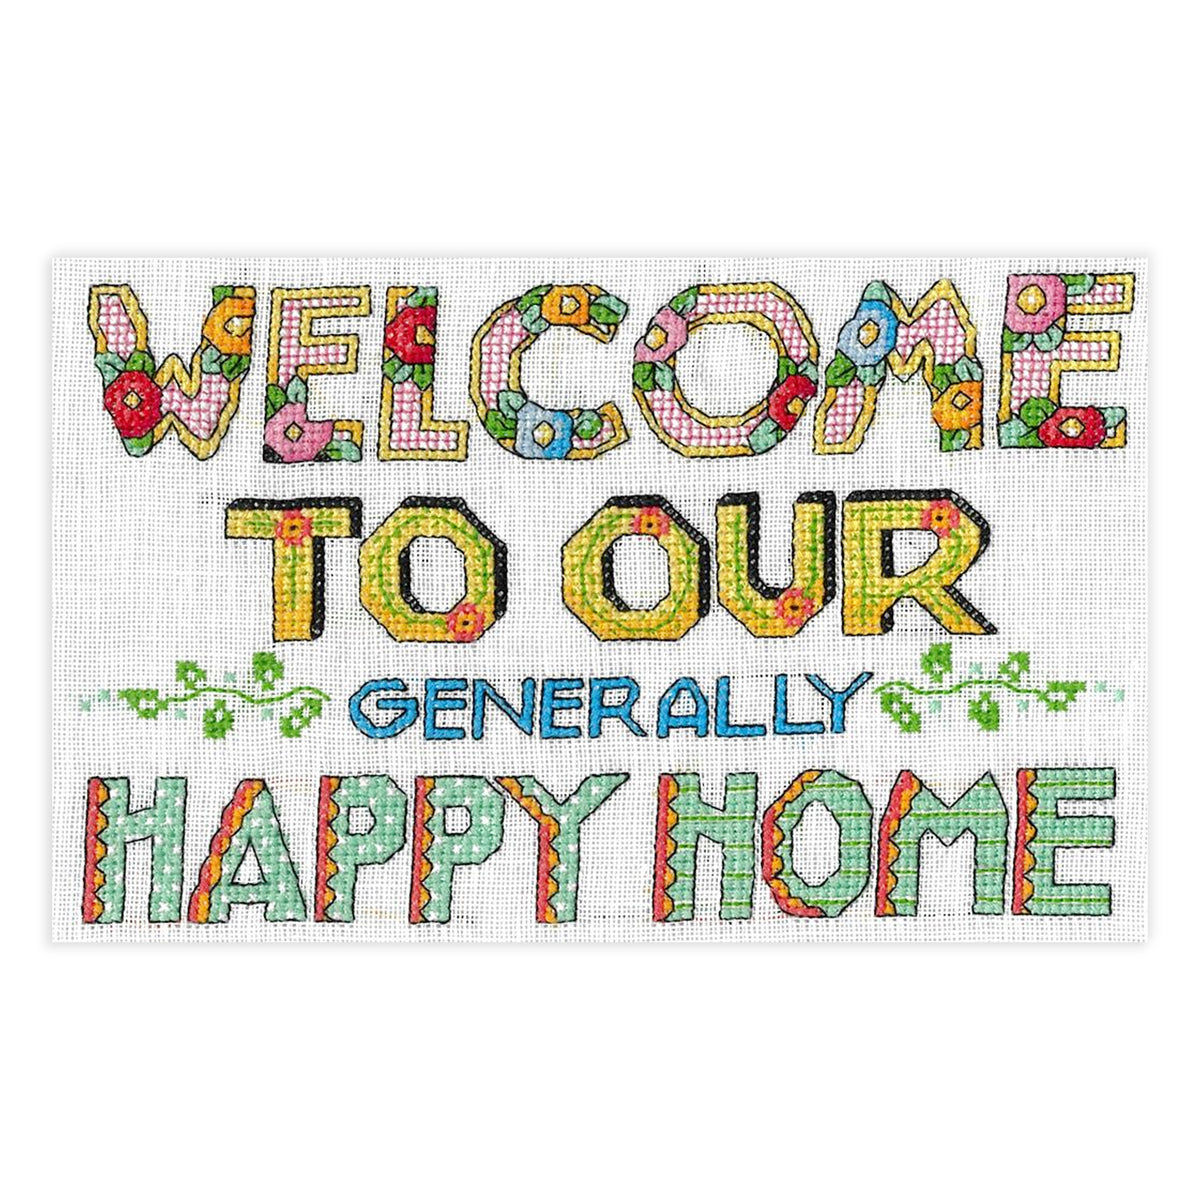 Our Happy Home Counted Cross Stitch Kit